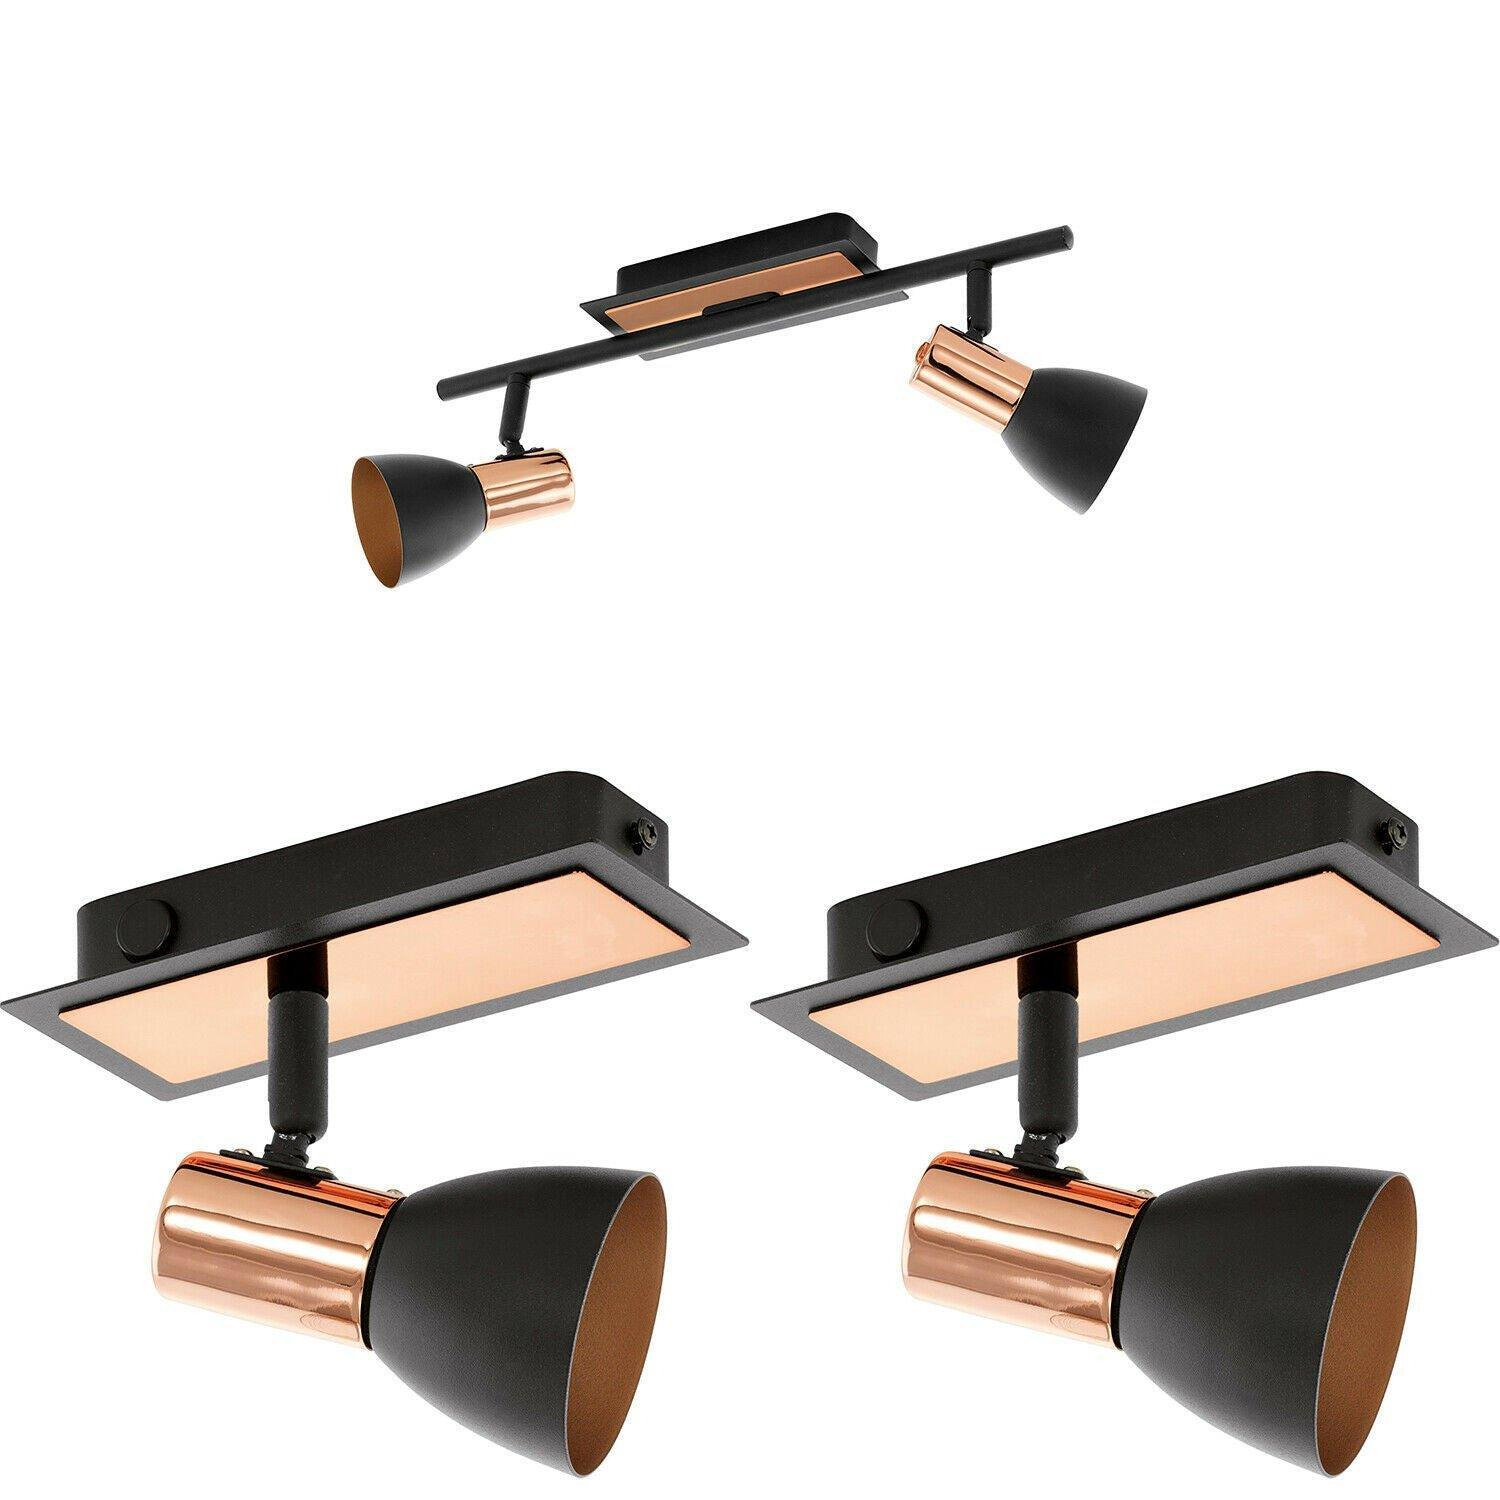 Twin Ceiling Spot Light & 2x Matching Wall Lights Black Copper Adjustable Shade - image 1